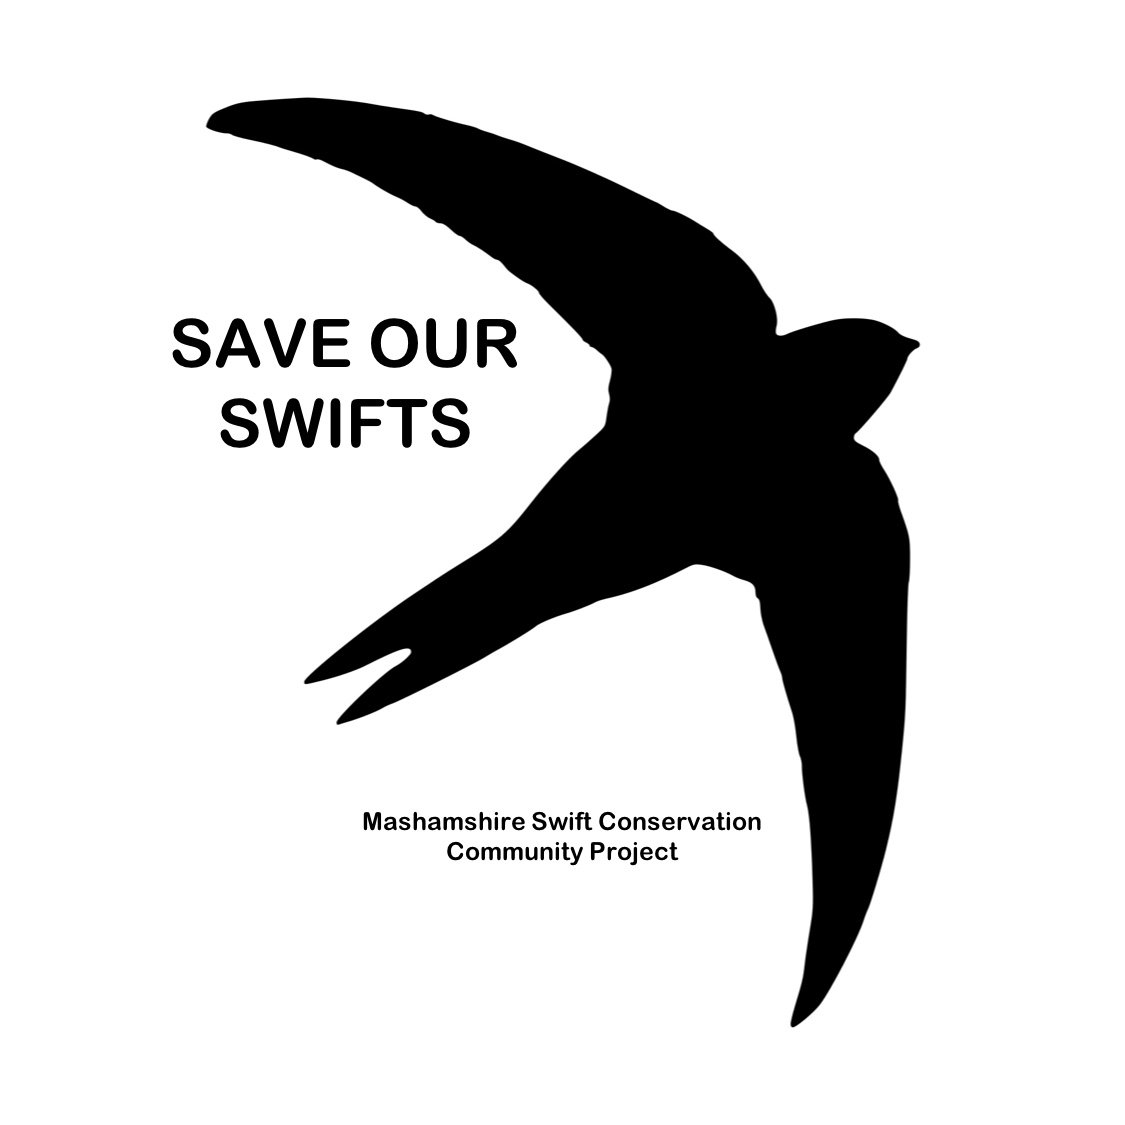 Mashamshire Swift Conservation Community Project has been formed to encourage the people of Mashamshire to help the iconic Masham swift population recover.